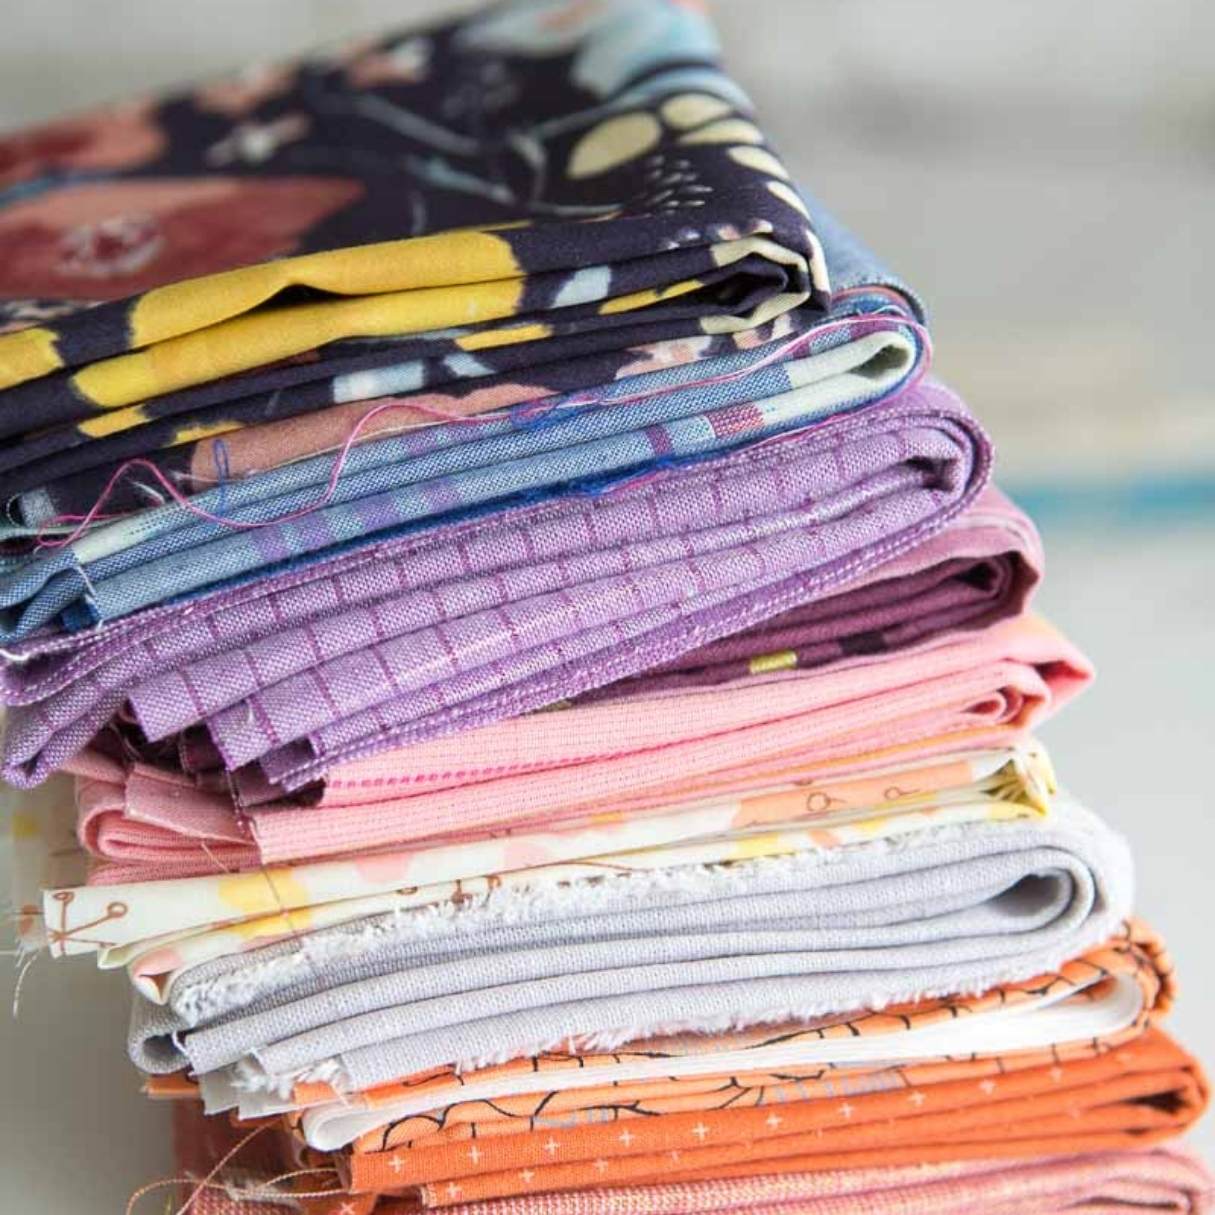 How To Store Quilting Fabric